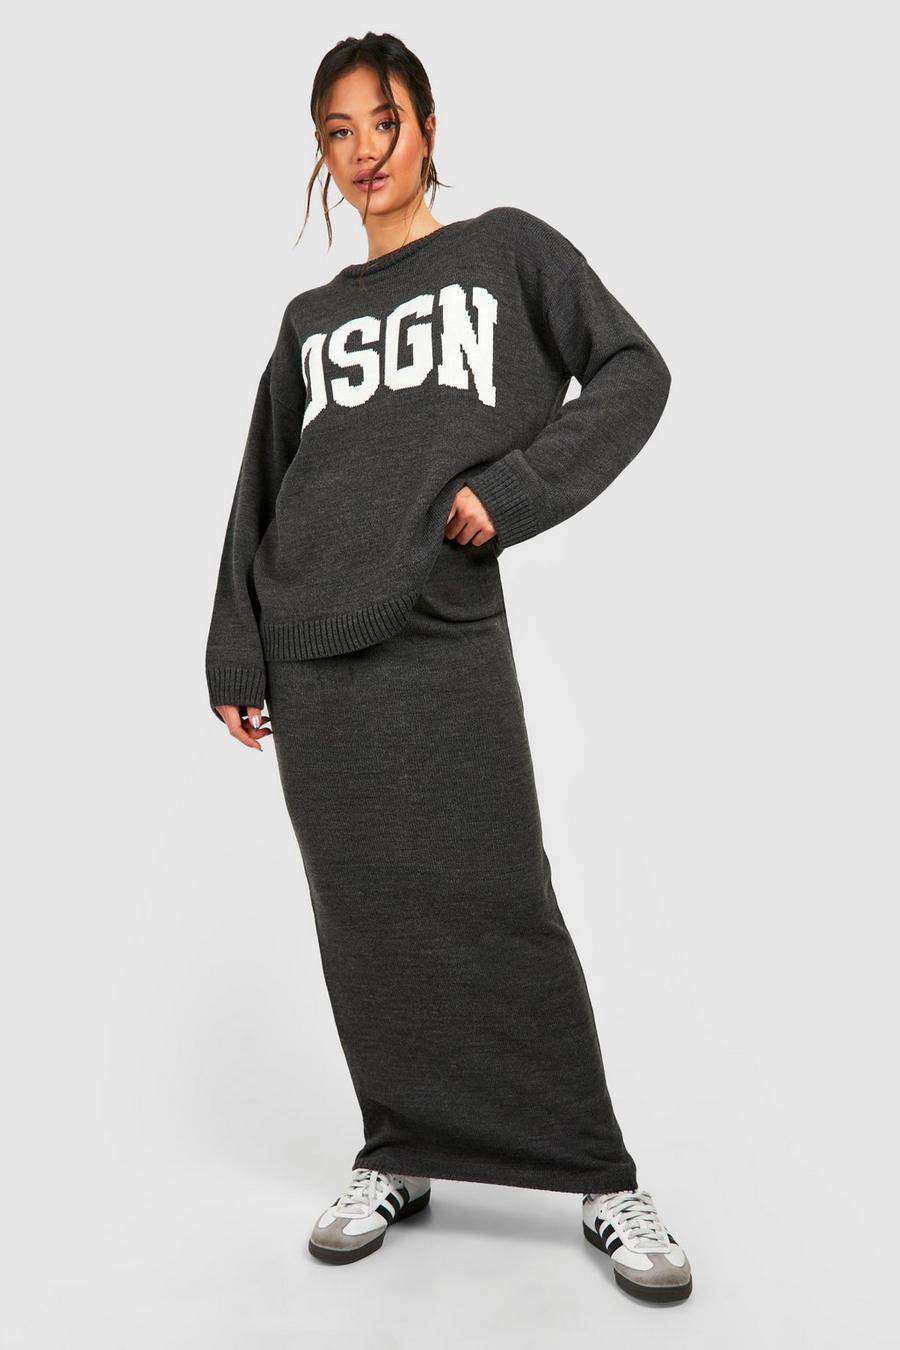 Dsgn Rundhals Strickpullover & Maxirock, Charcoal image number 1